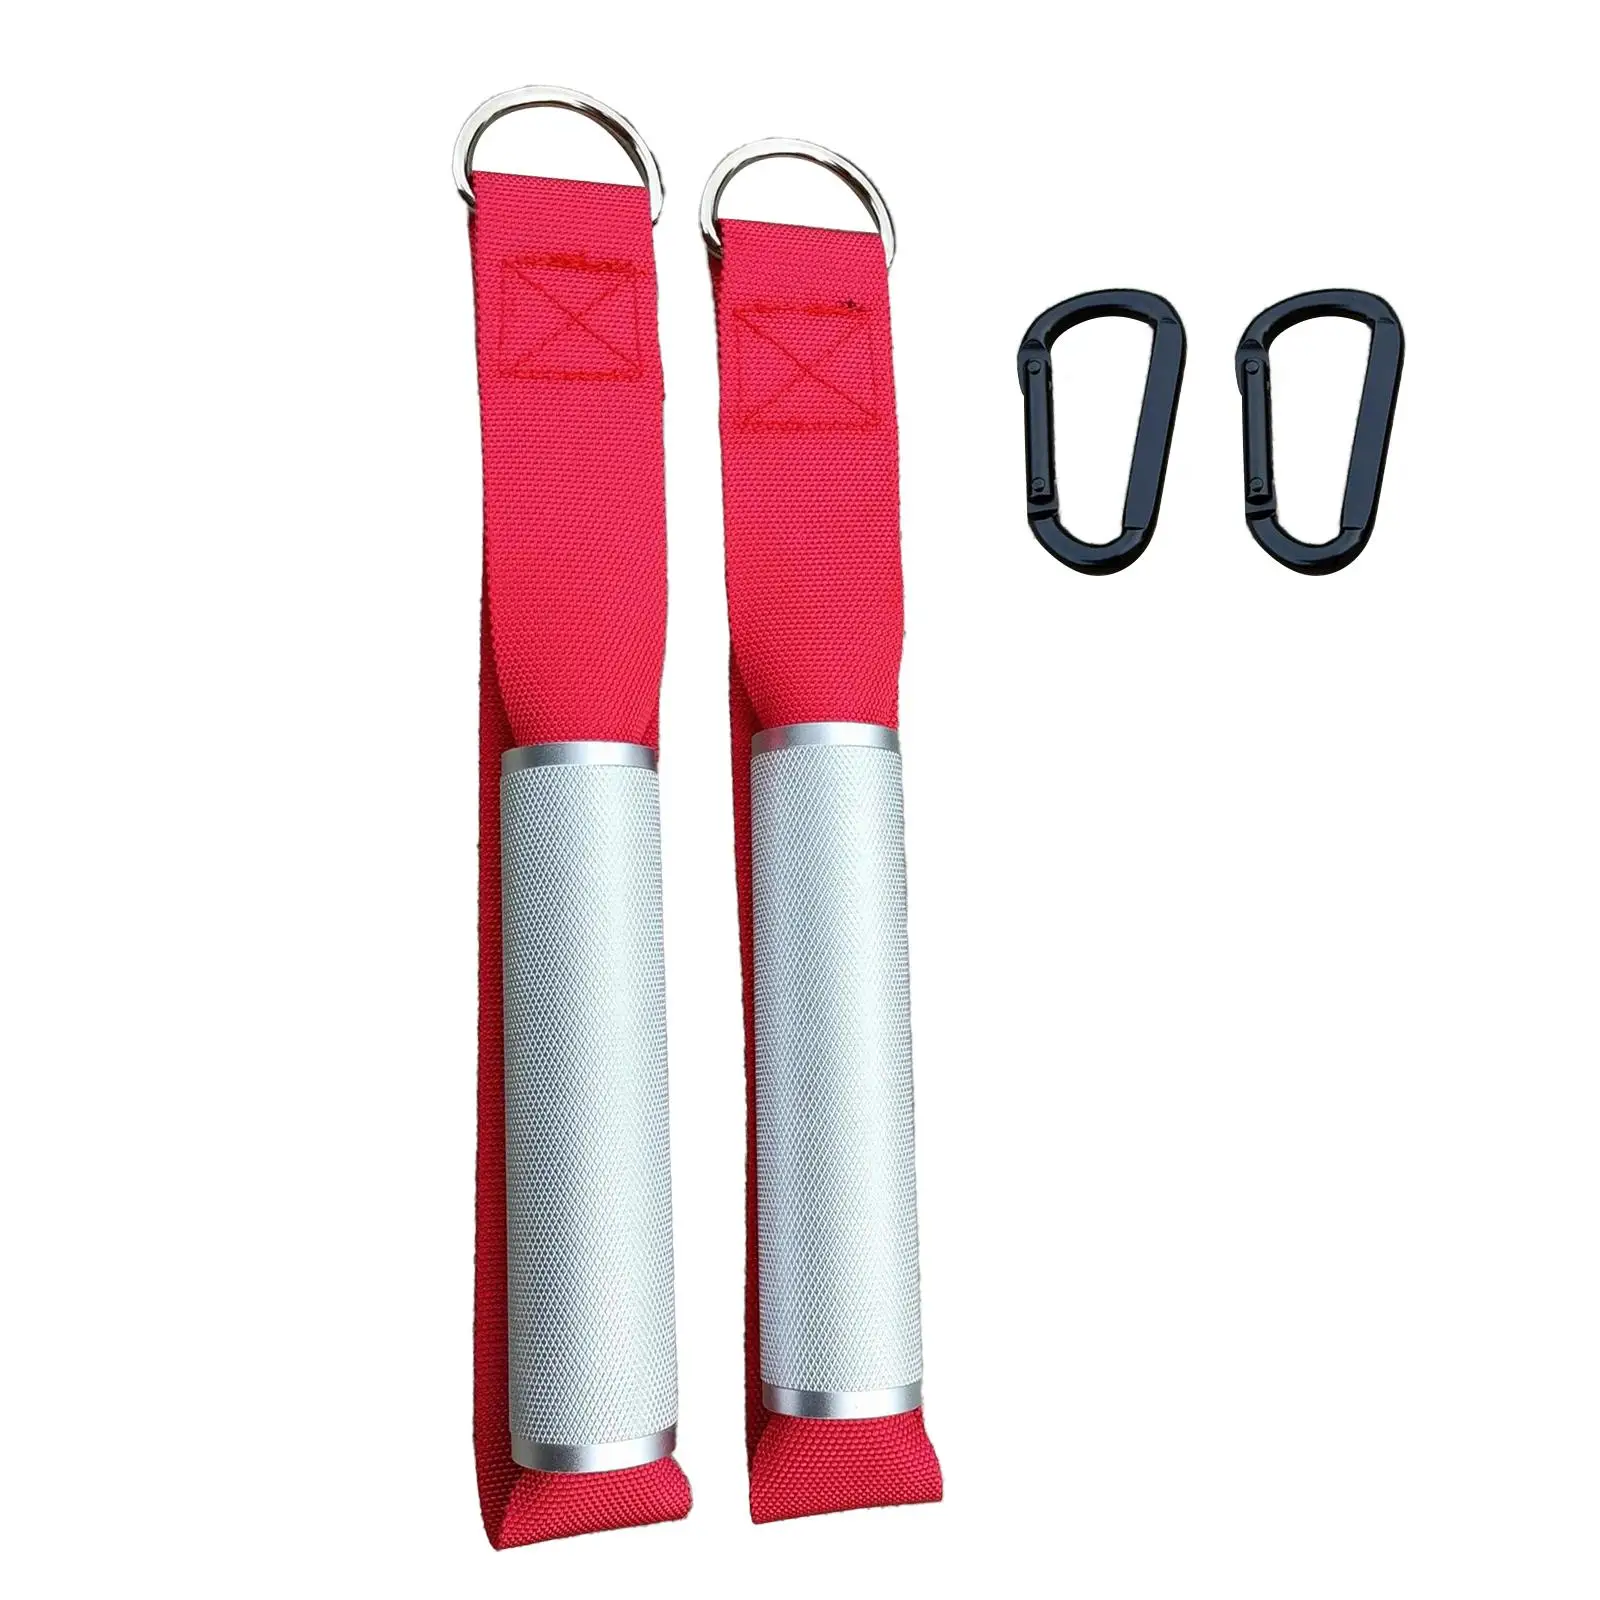 2 Pieces Cable Machine Attachment Handles Tool Gymnastics Hanging Workout Exercise Equipment for Strength Trainer Pilates Yoga